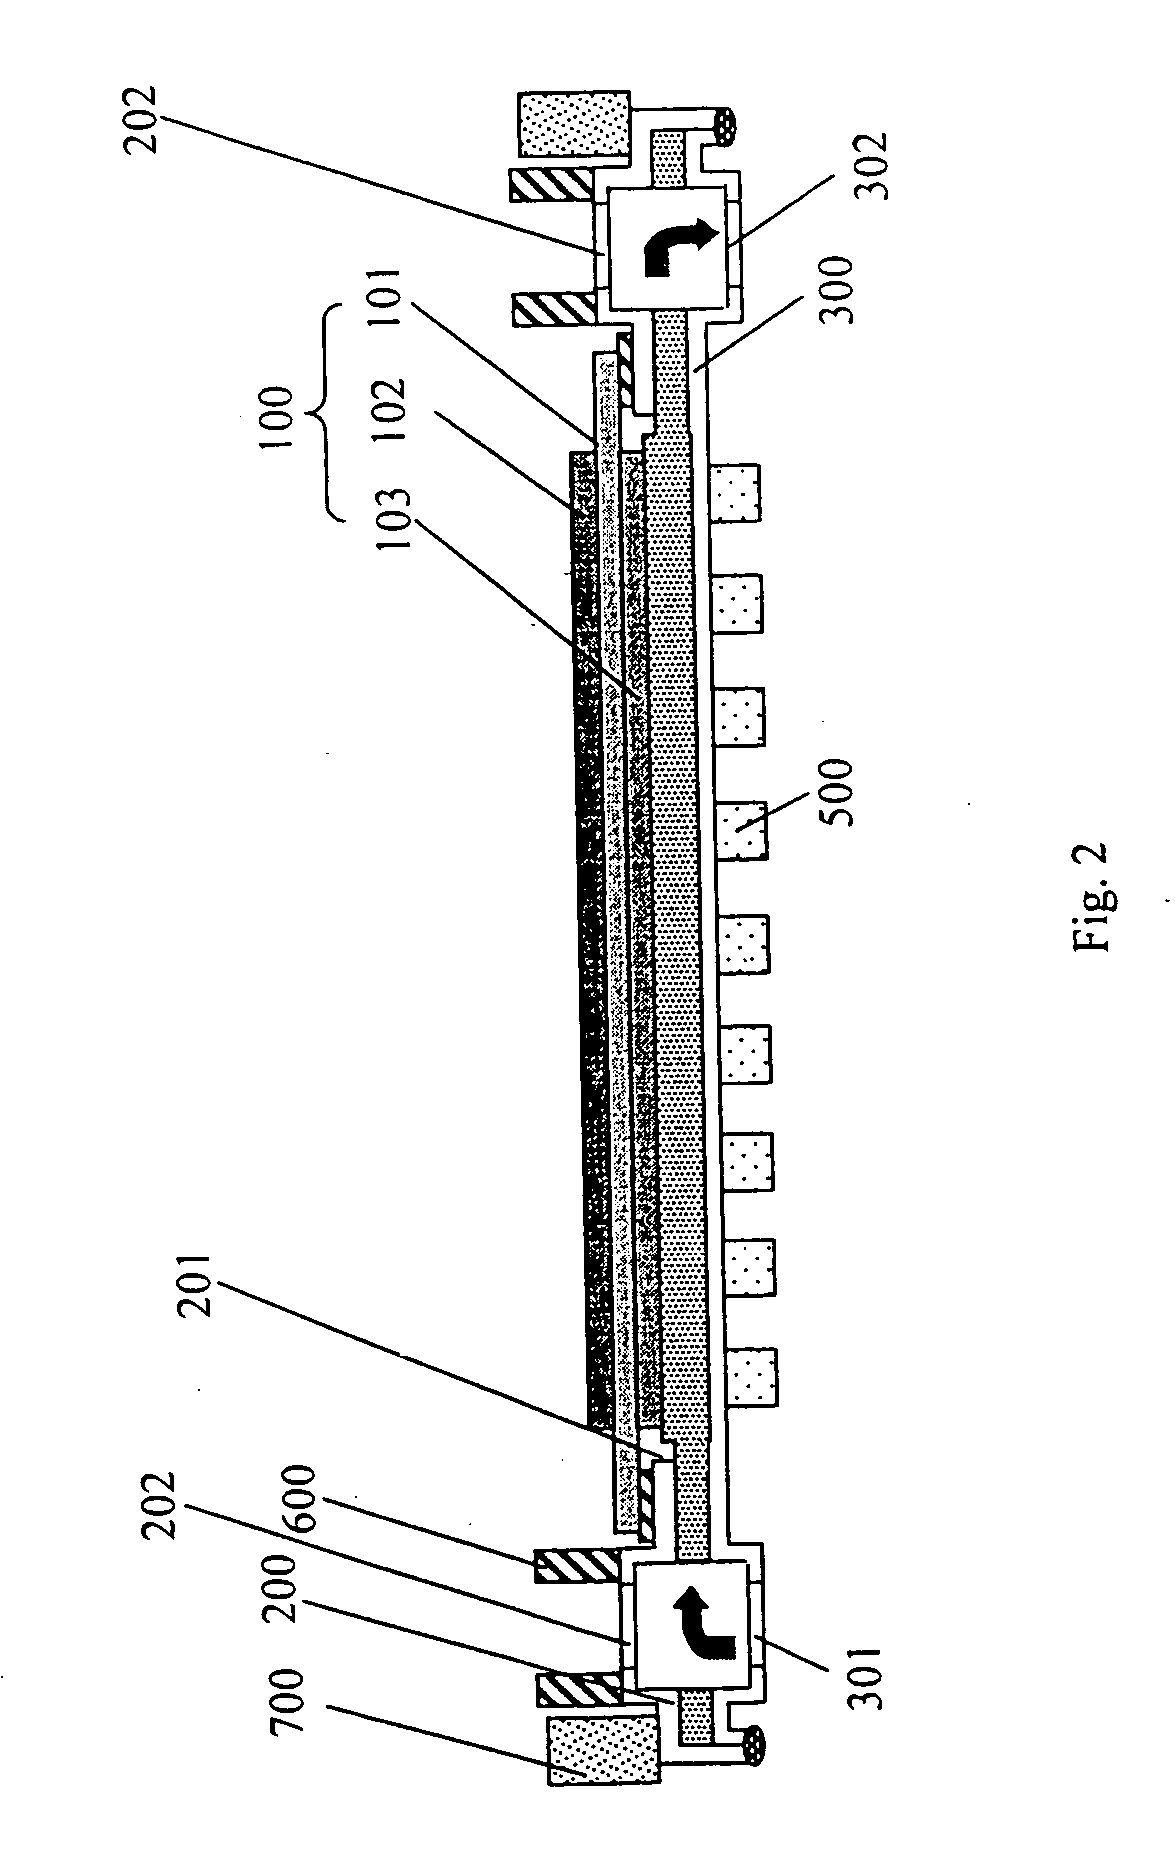 Interconnector for high-temperature fuel cell unit